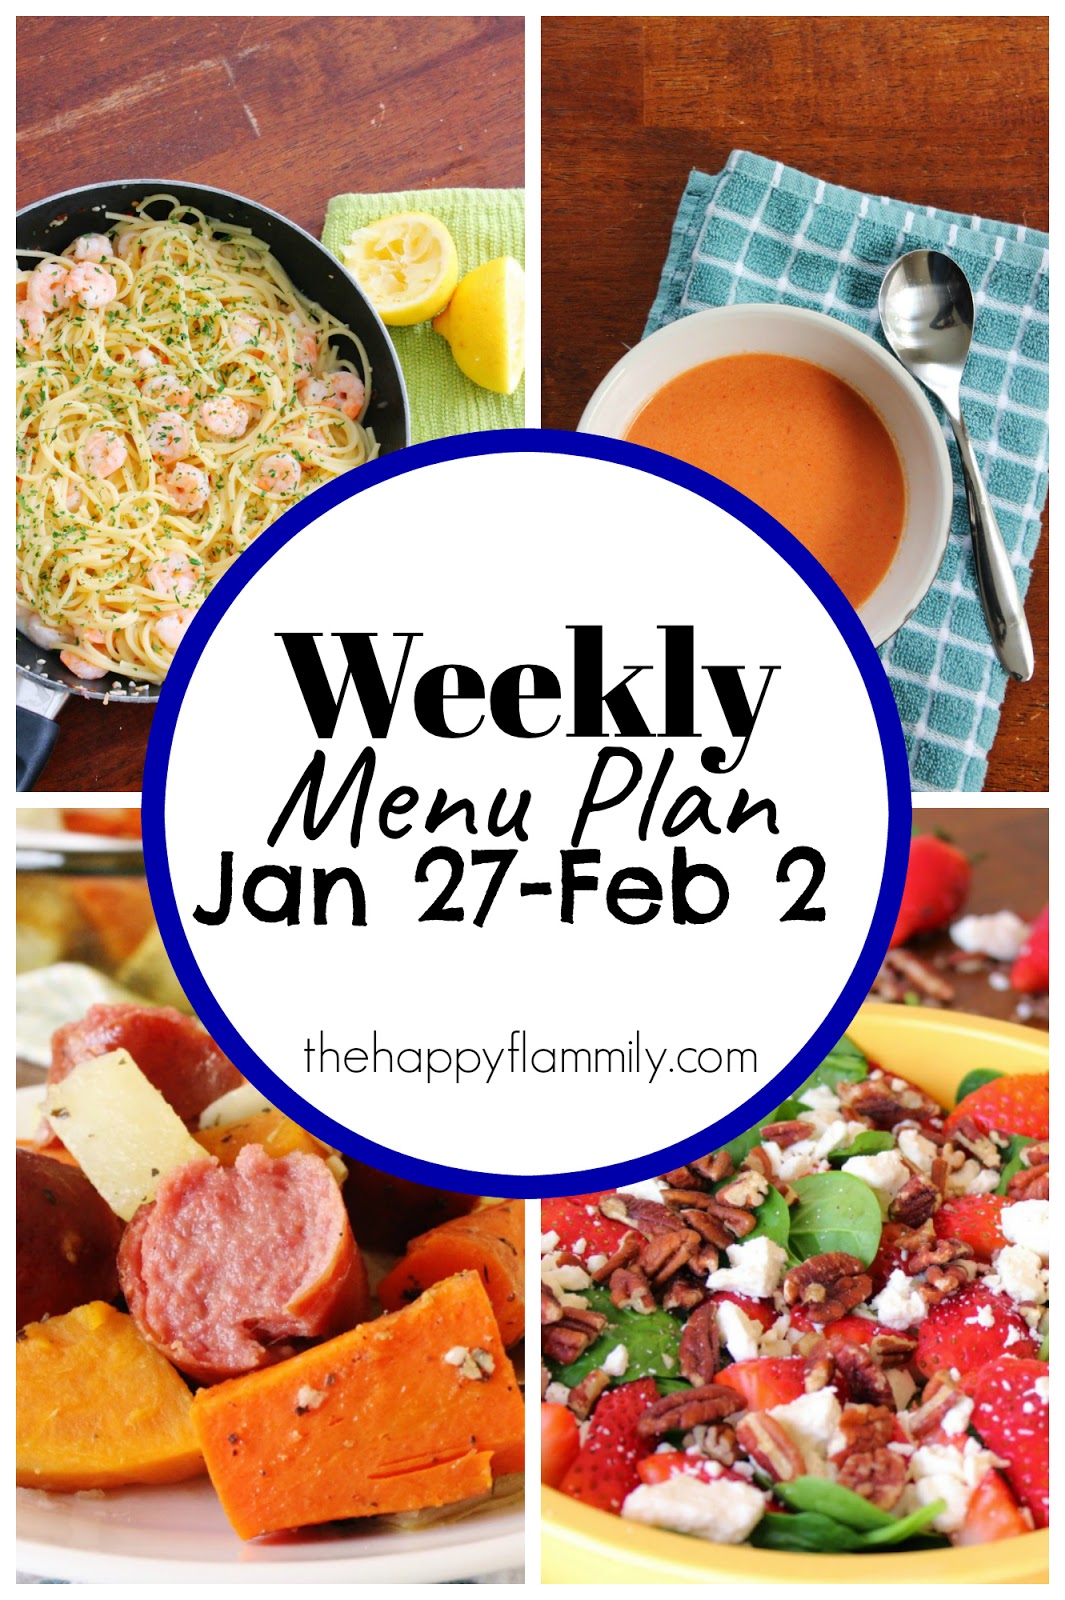 Family meal planning on a budget. Free family meal plans. Family meal planning calendar. Family meal planner template. Healthy family meal planning. Sample family meal plan. Family meal planning app. Weekly meal plan.